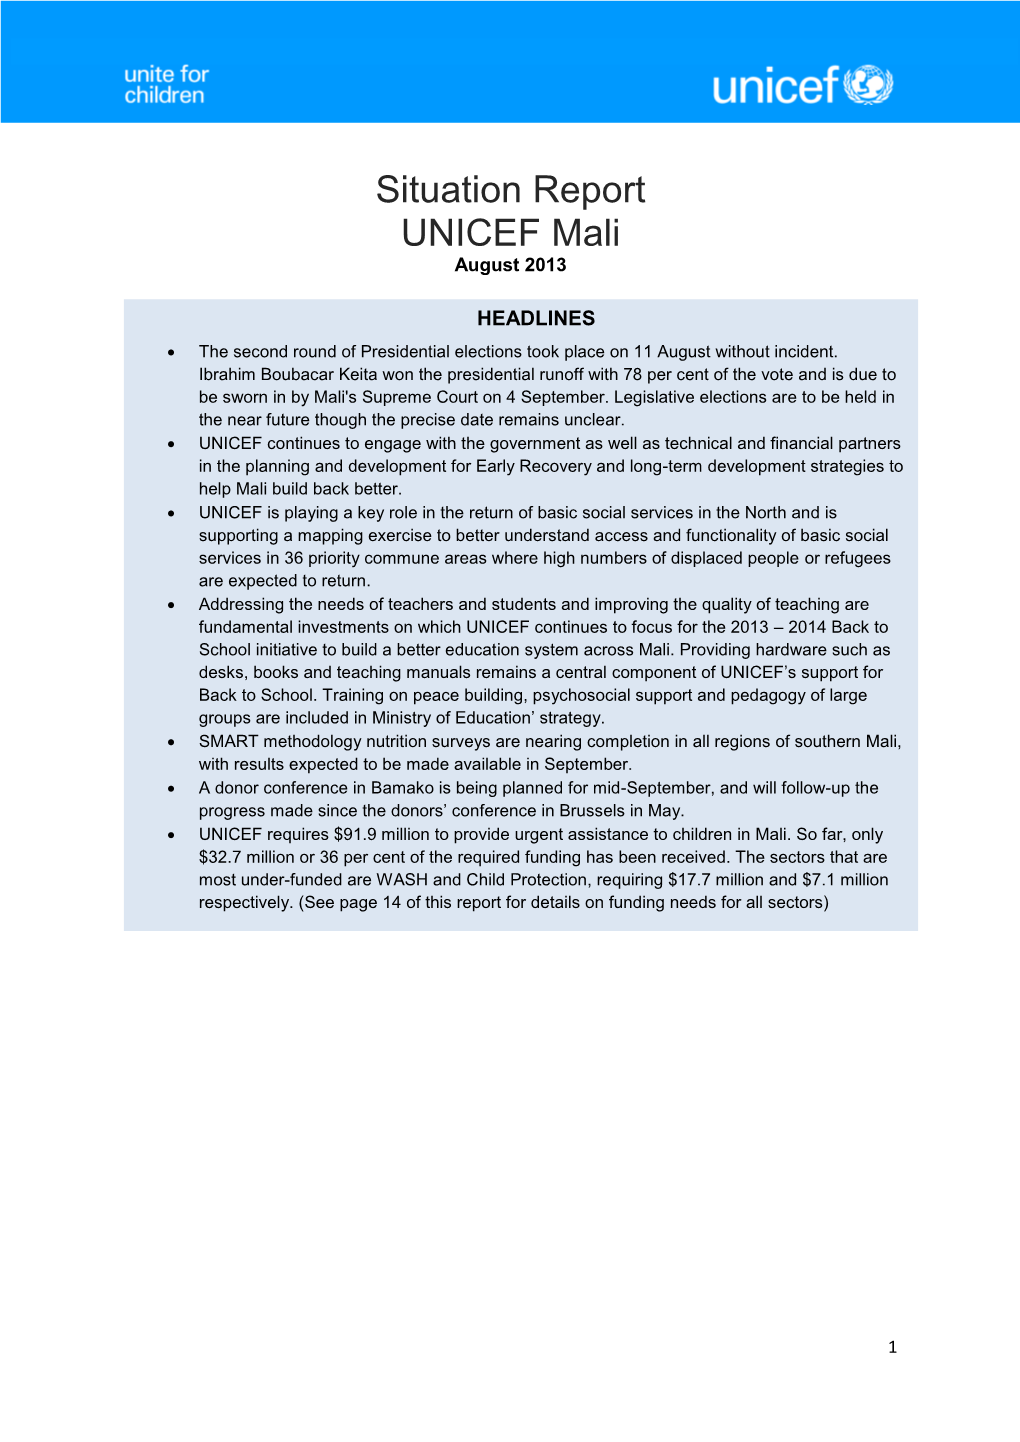 Situation Report UNICEF Mali August 2013